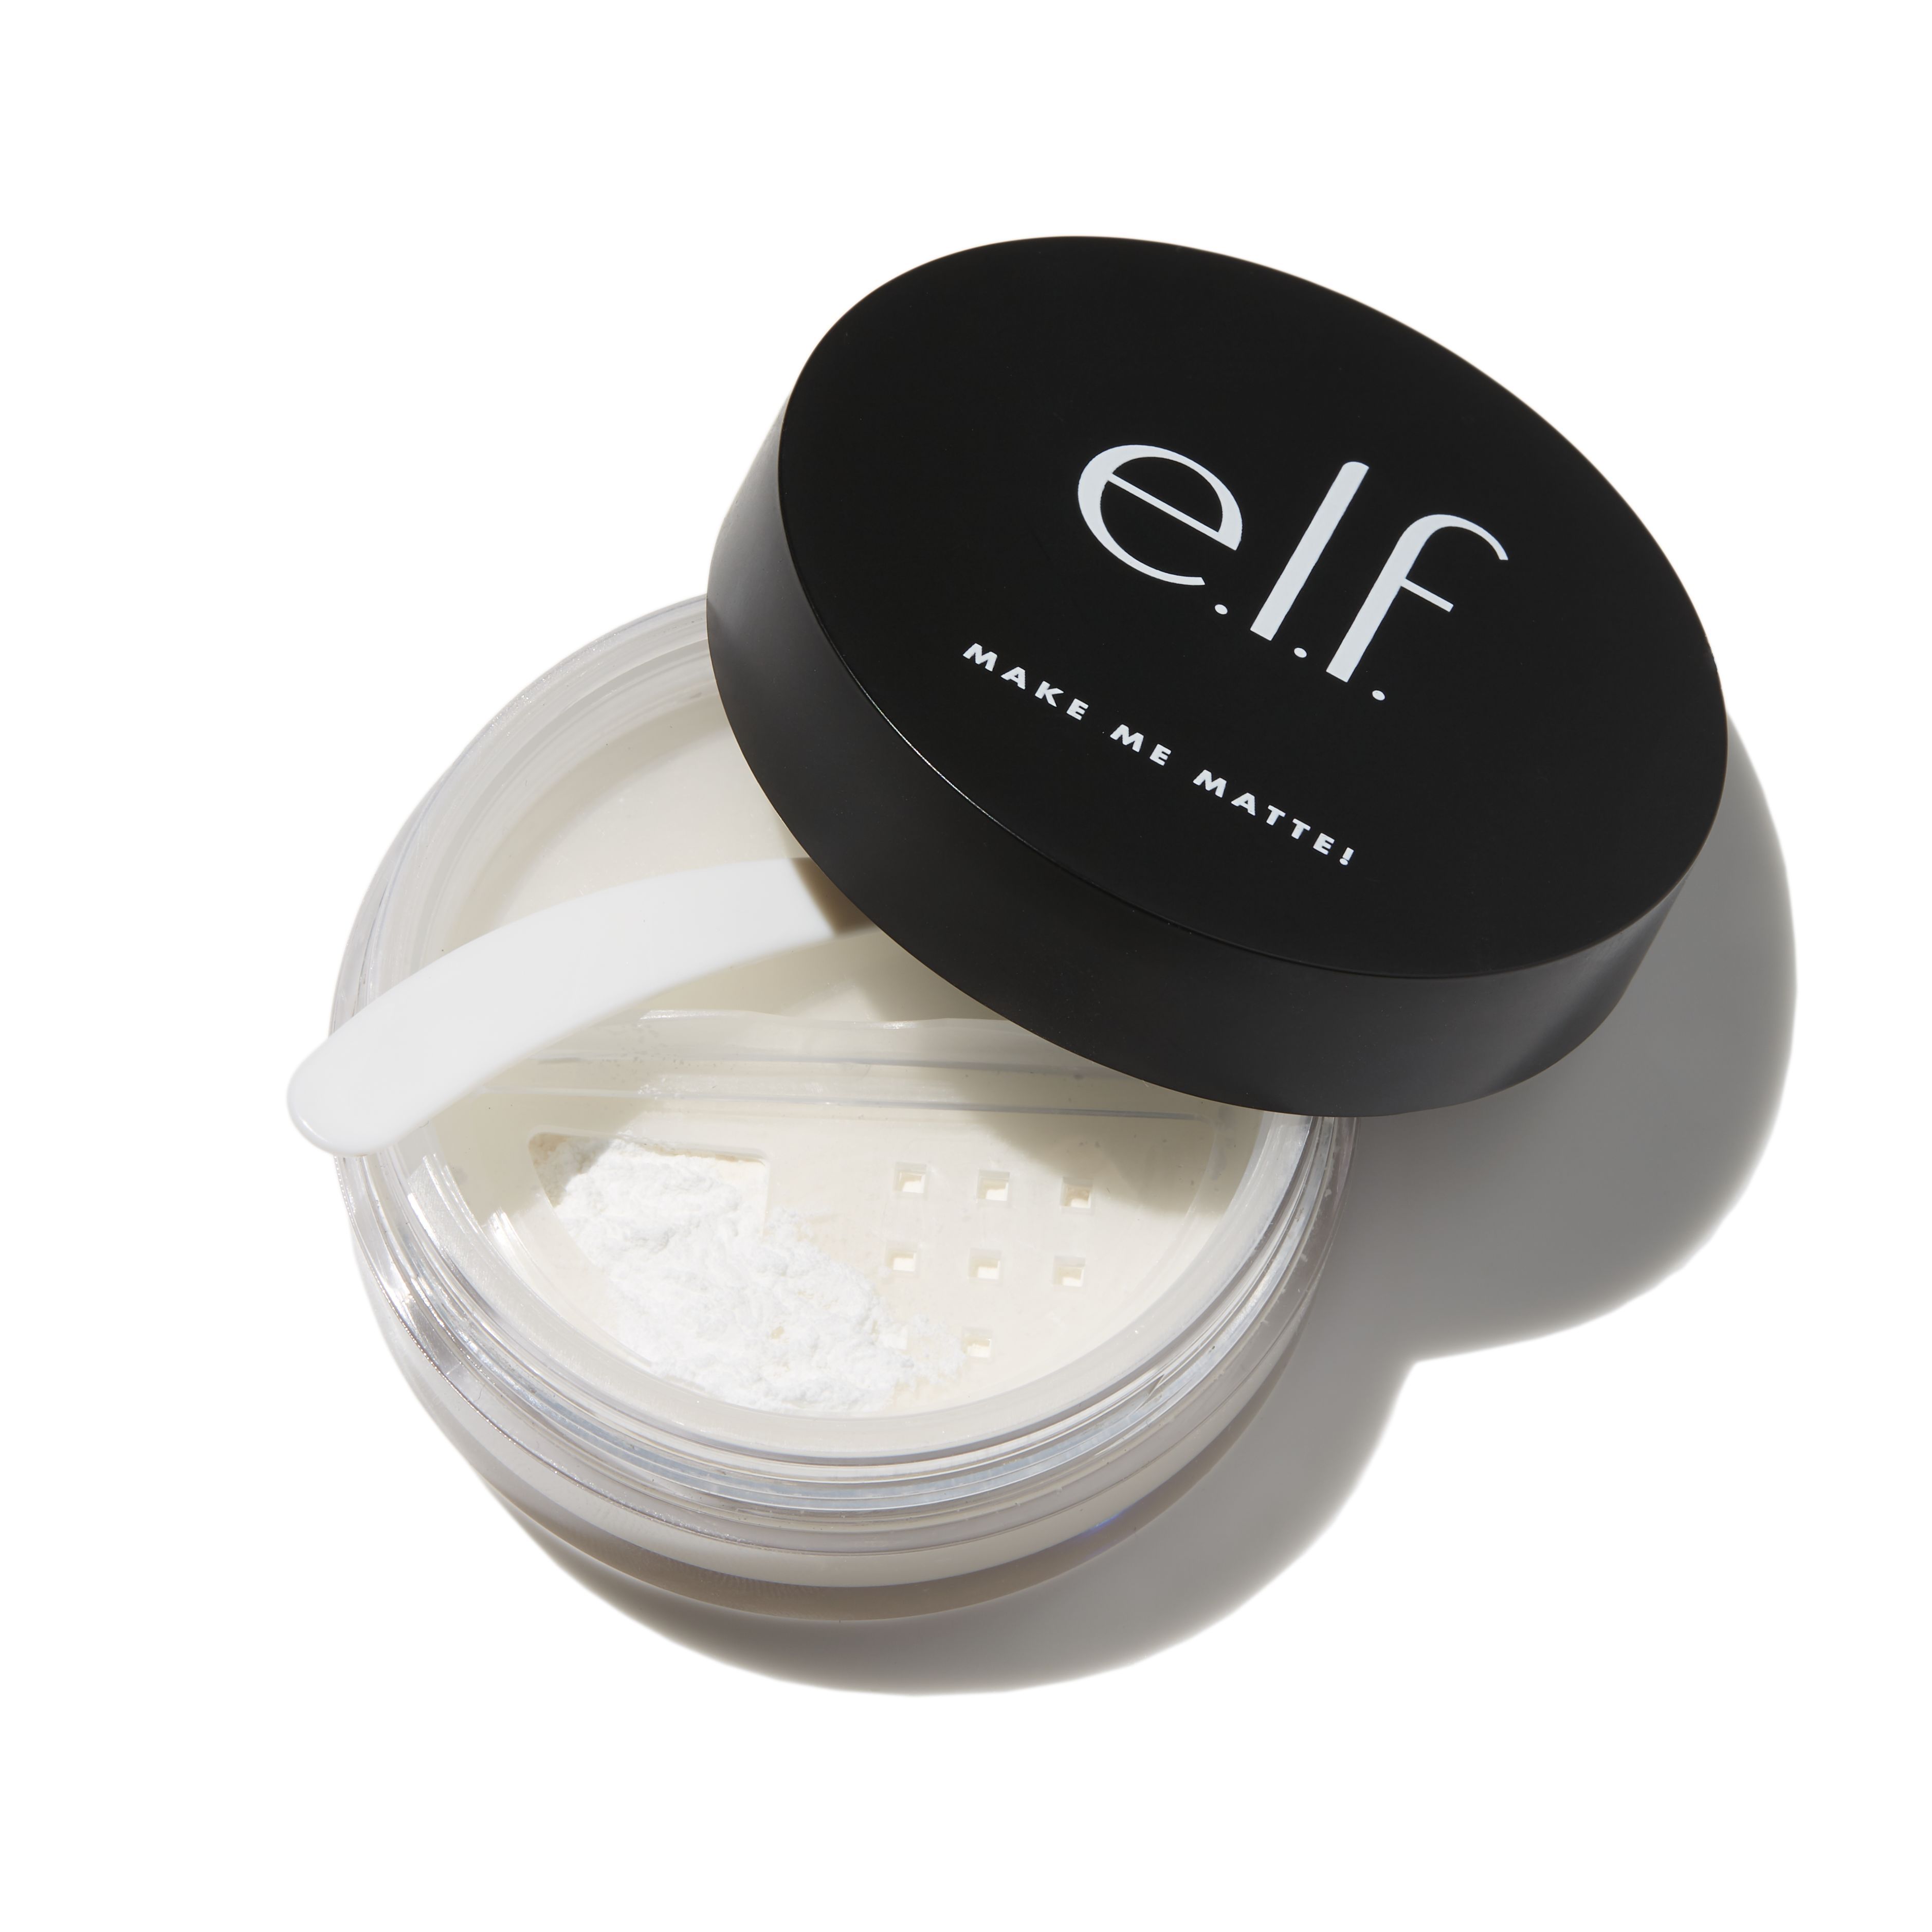 8 e.l.f. cosmetics products you didn’t know existed